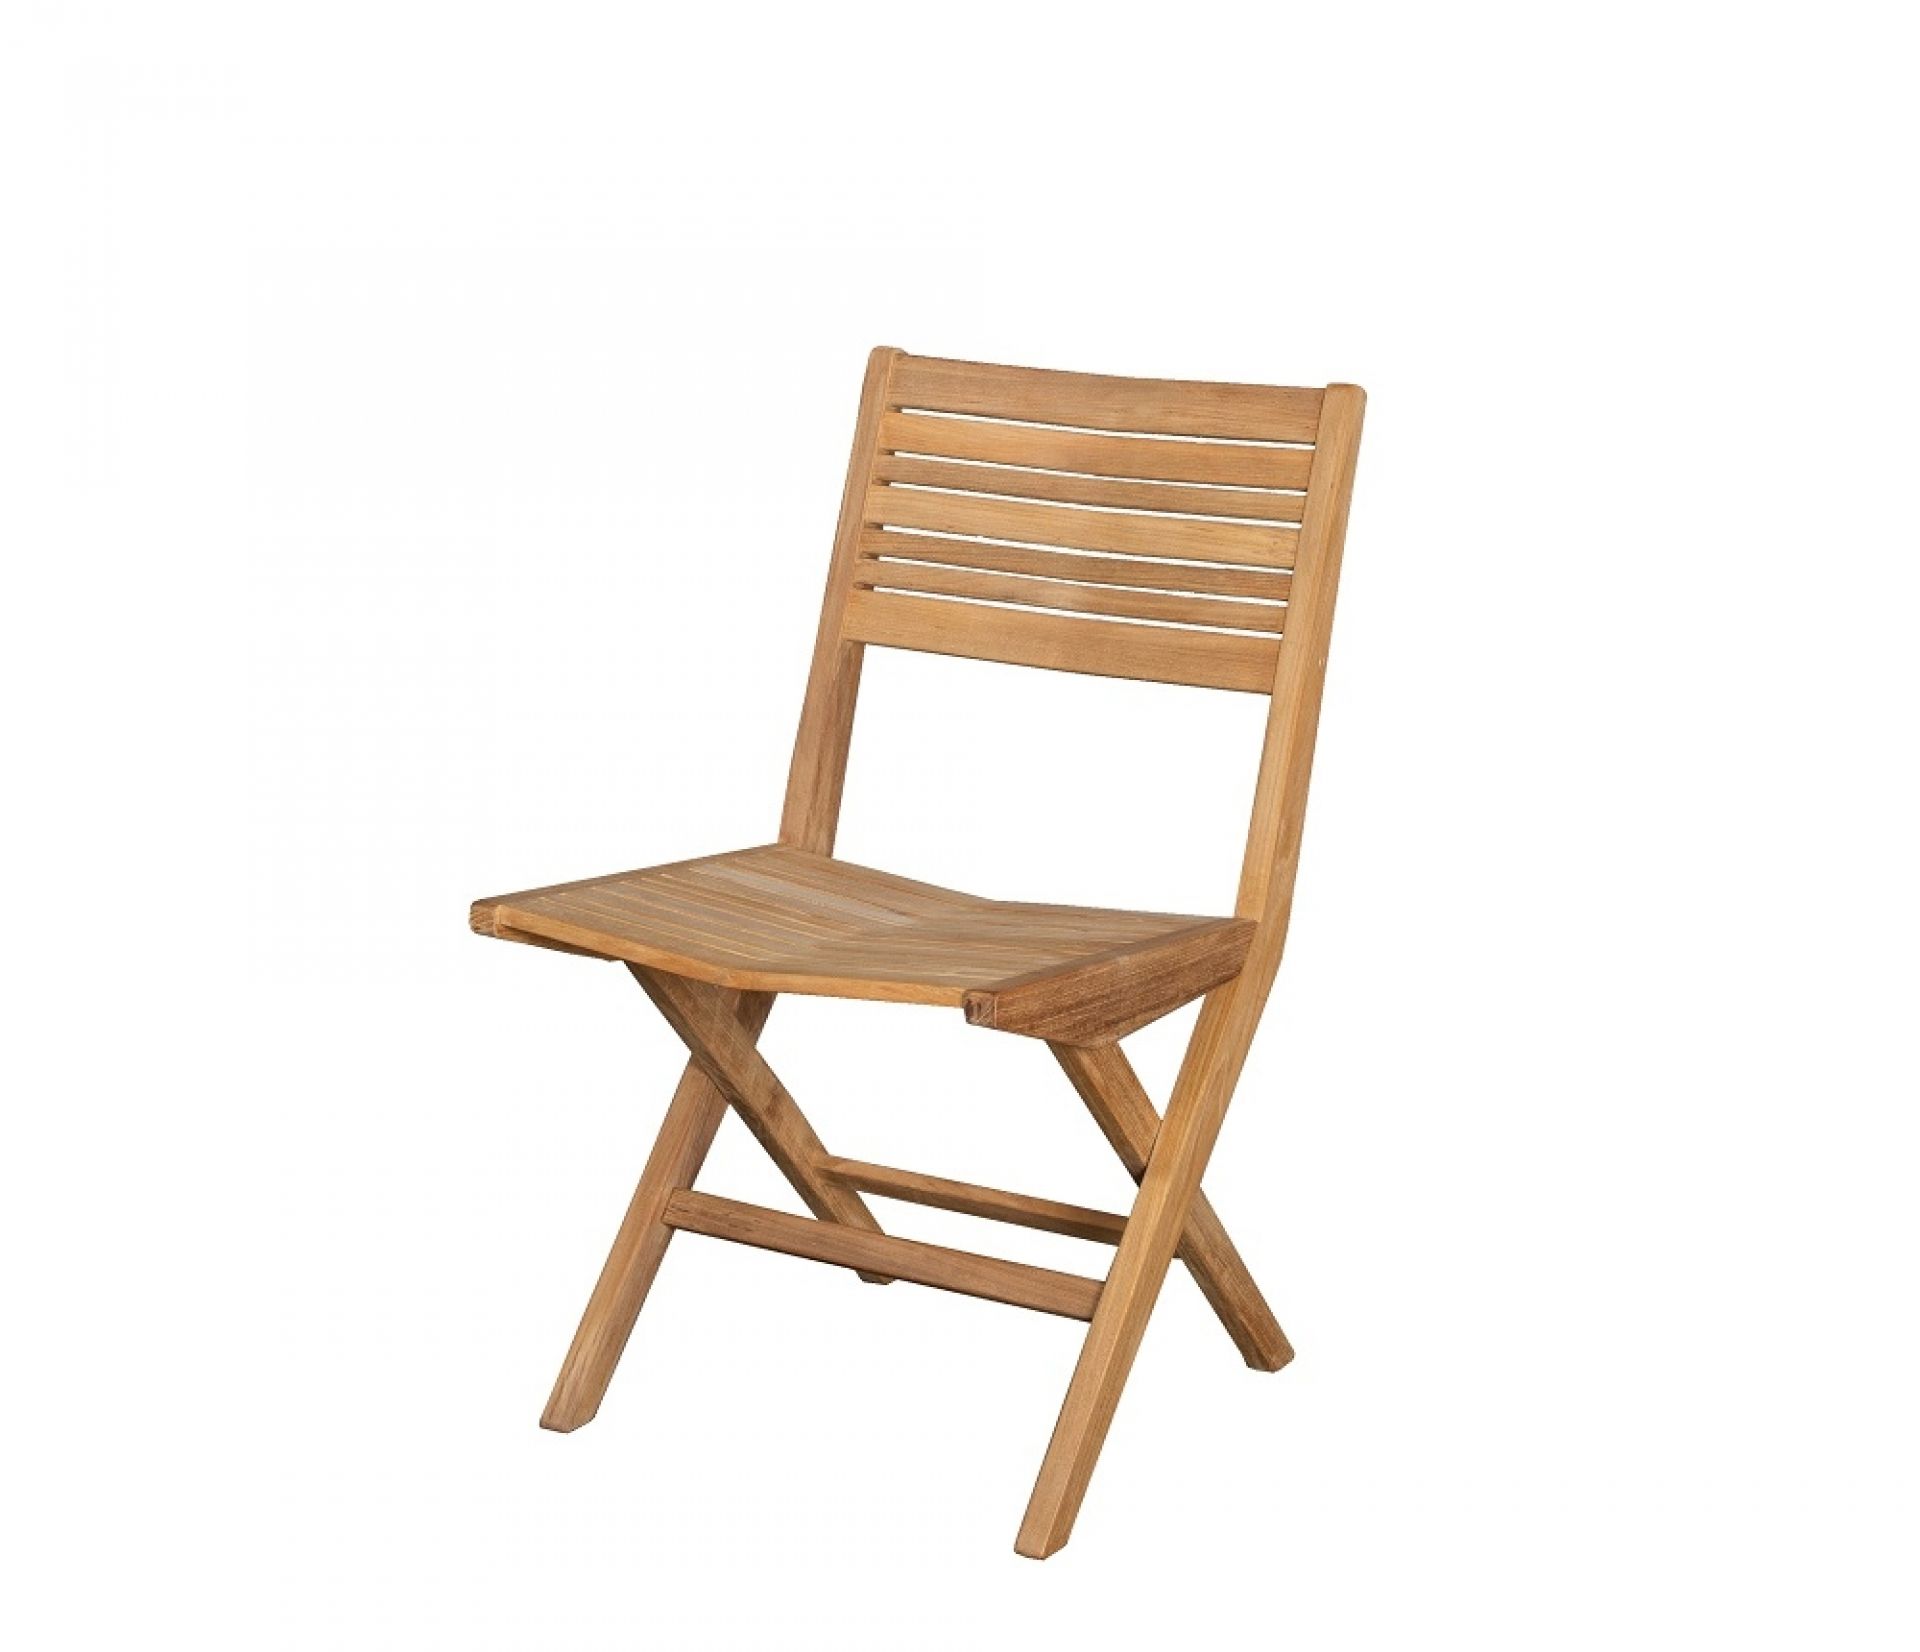 Flip Outdoor Folding Chair Set Of 2, Wooden Outdoor Foldable Chairs